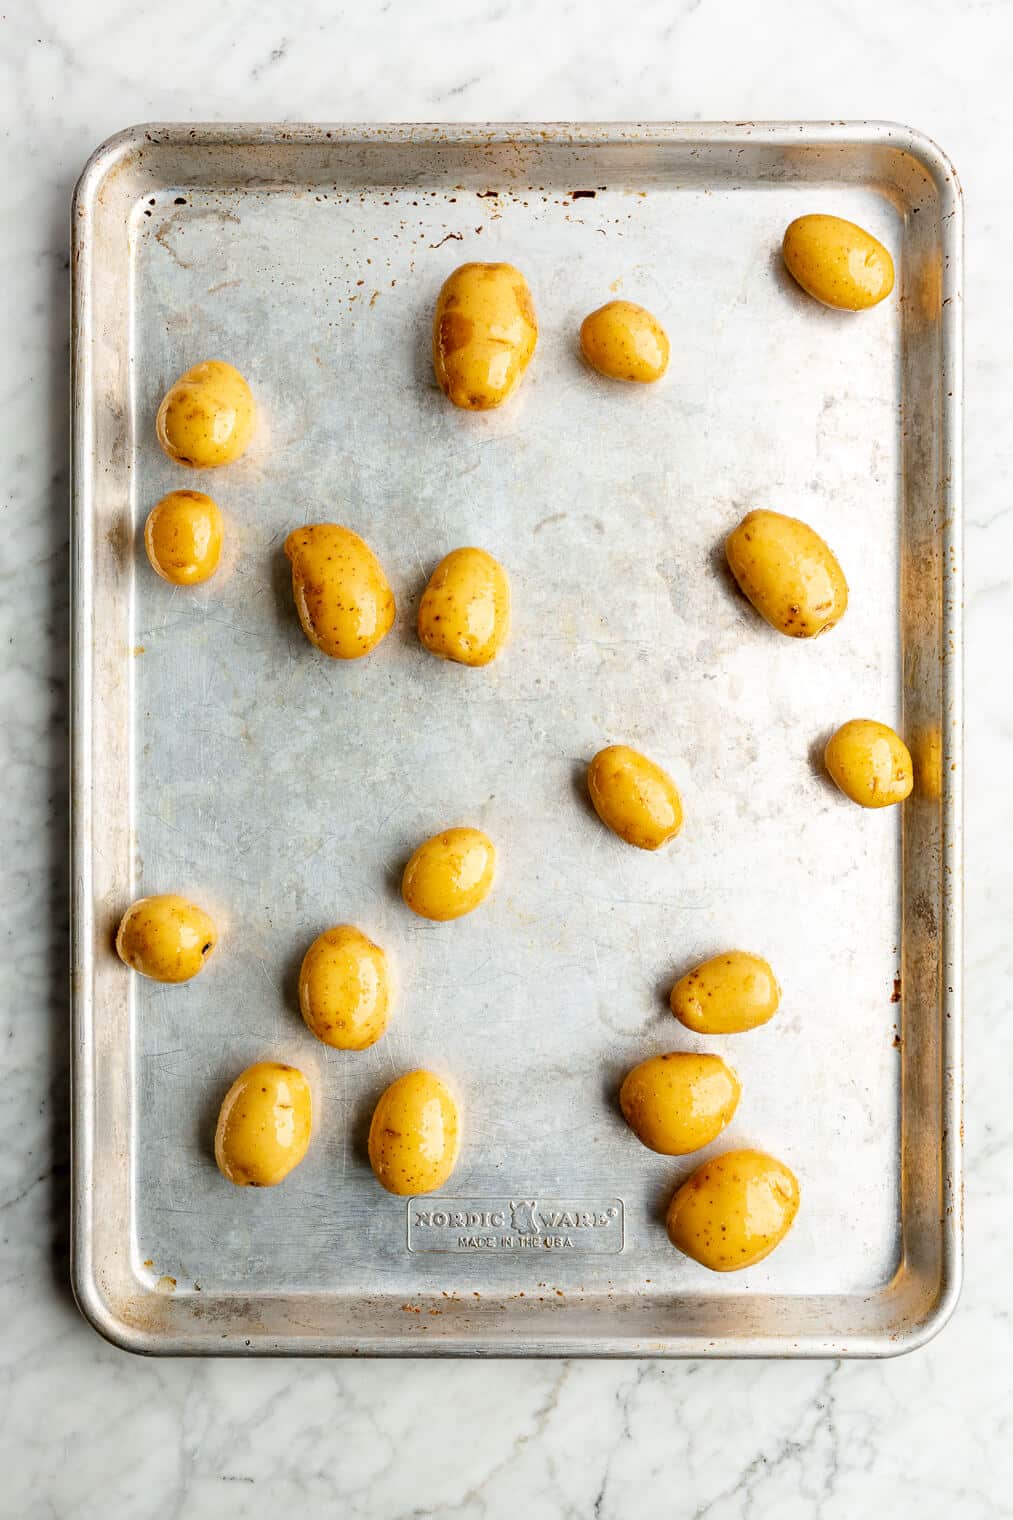 Baby potatoes spread out on a sheet pan.